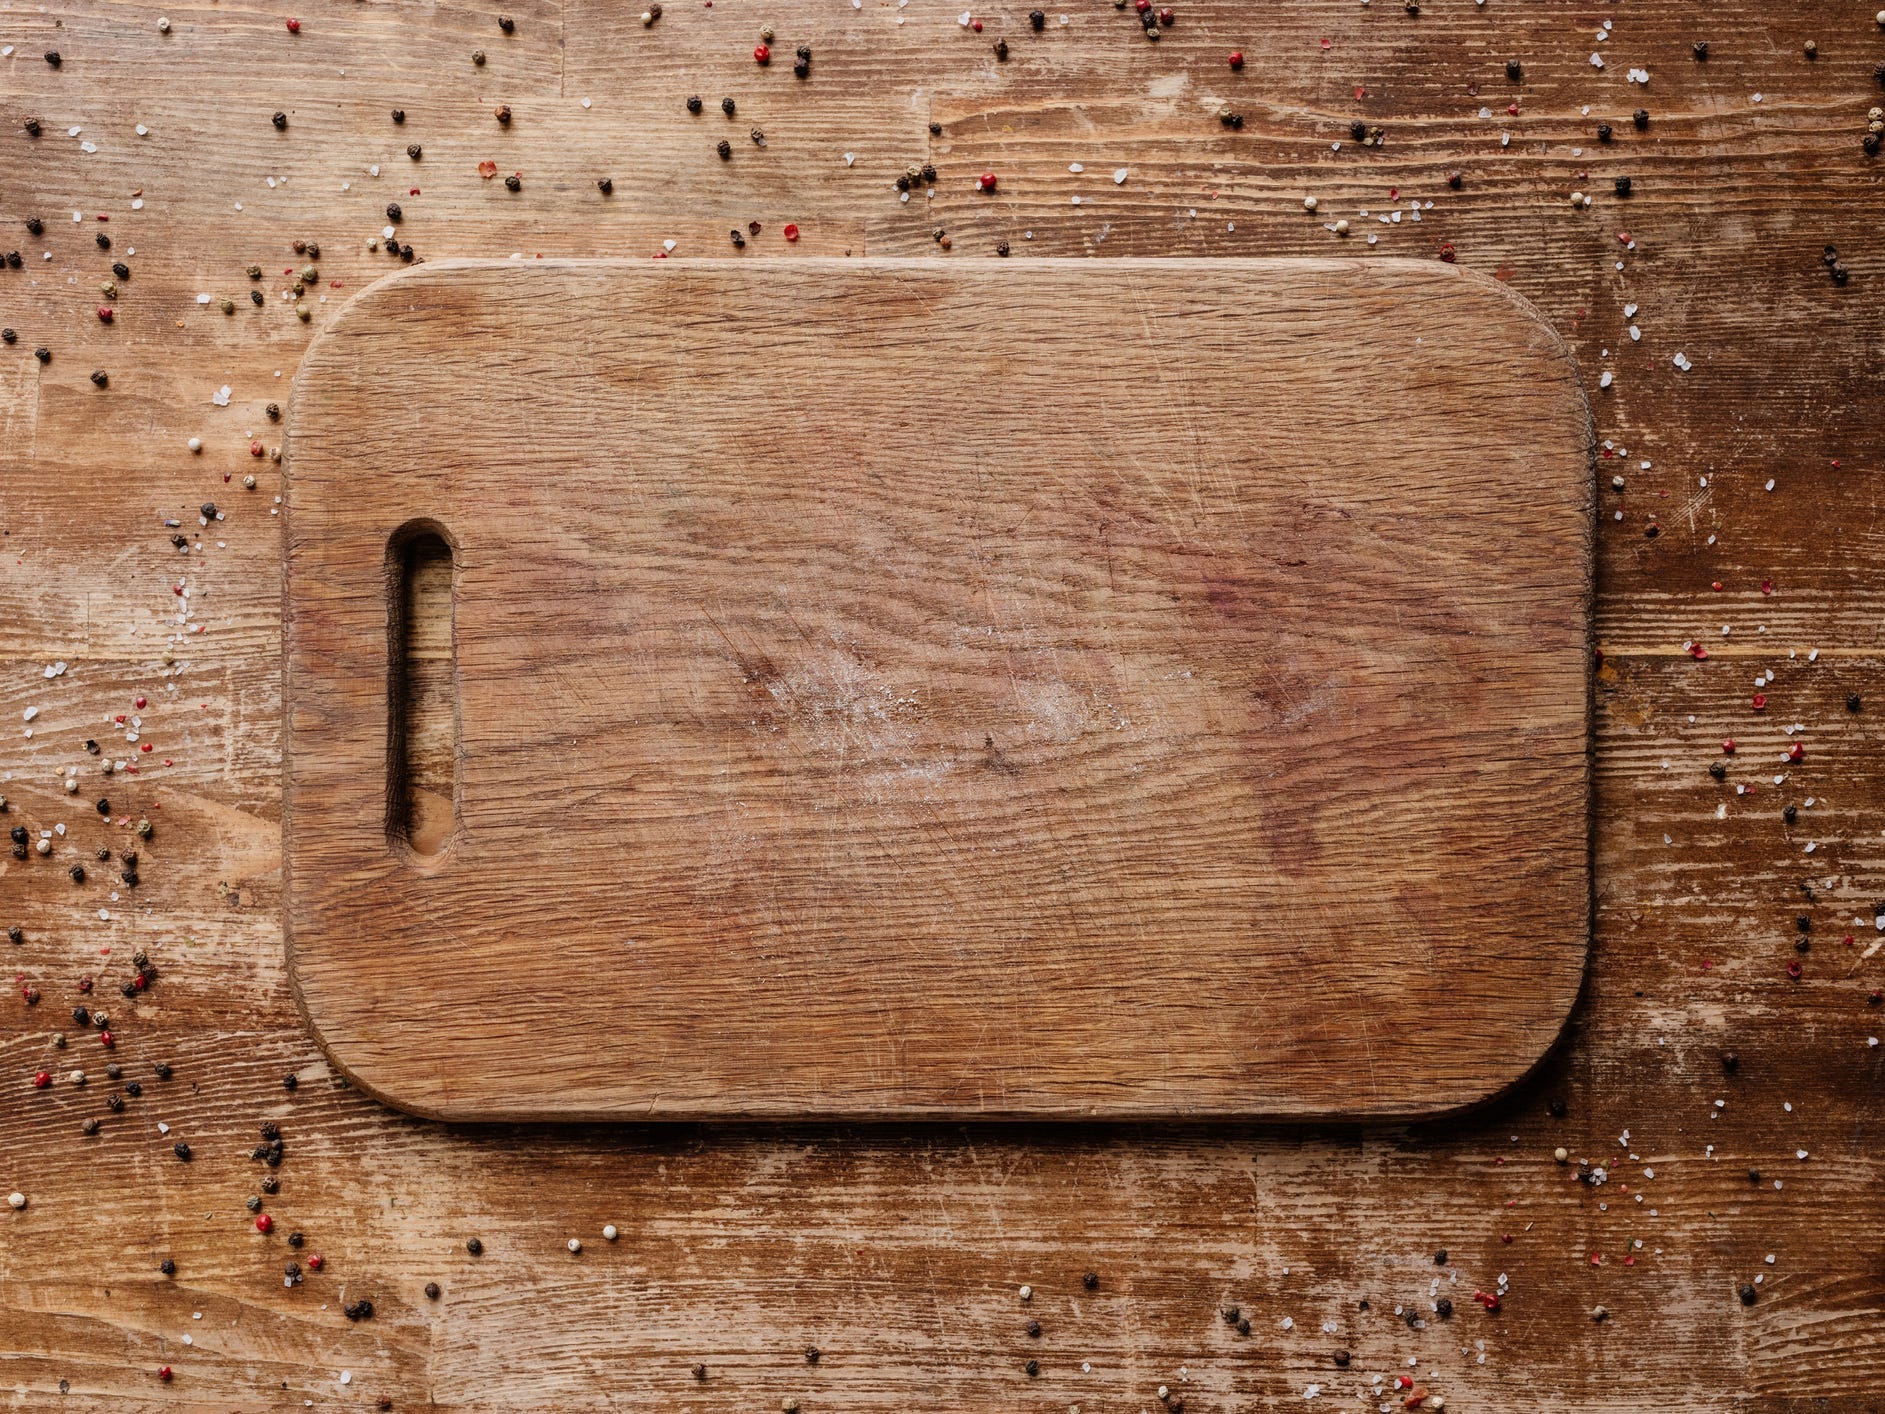 Wooden cutting board on top of a wooden table